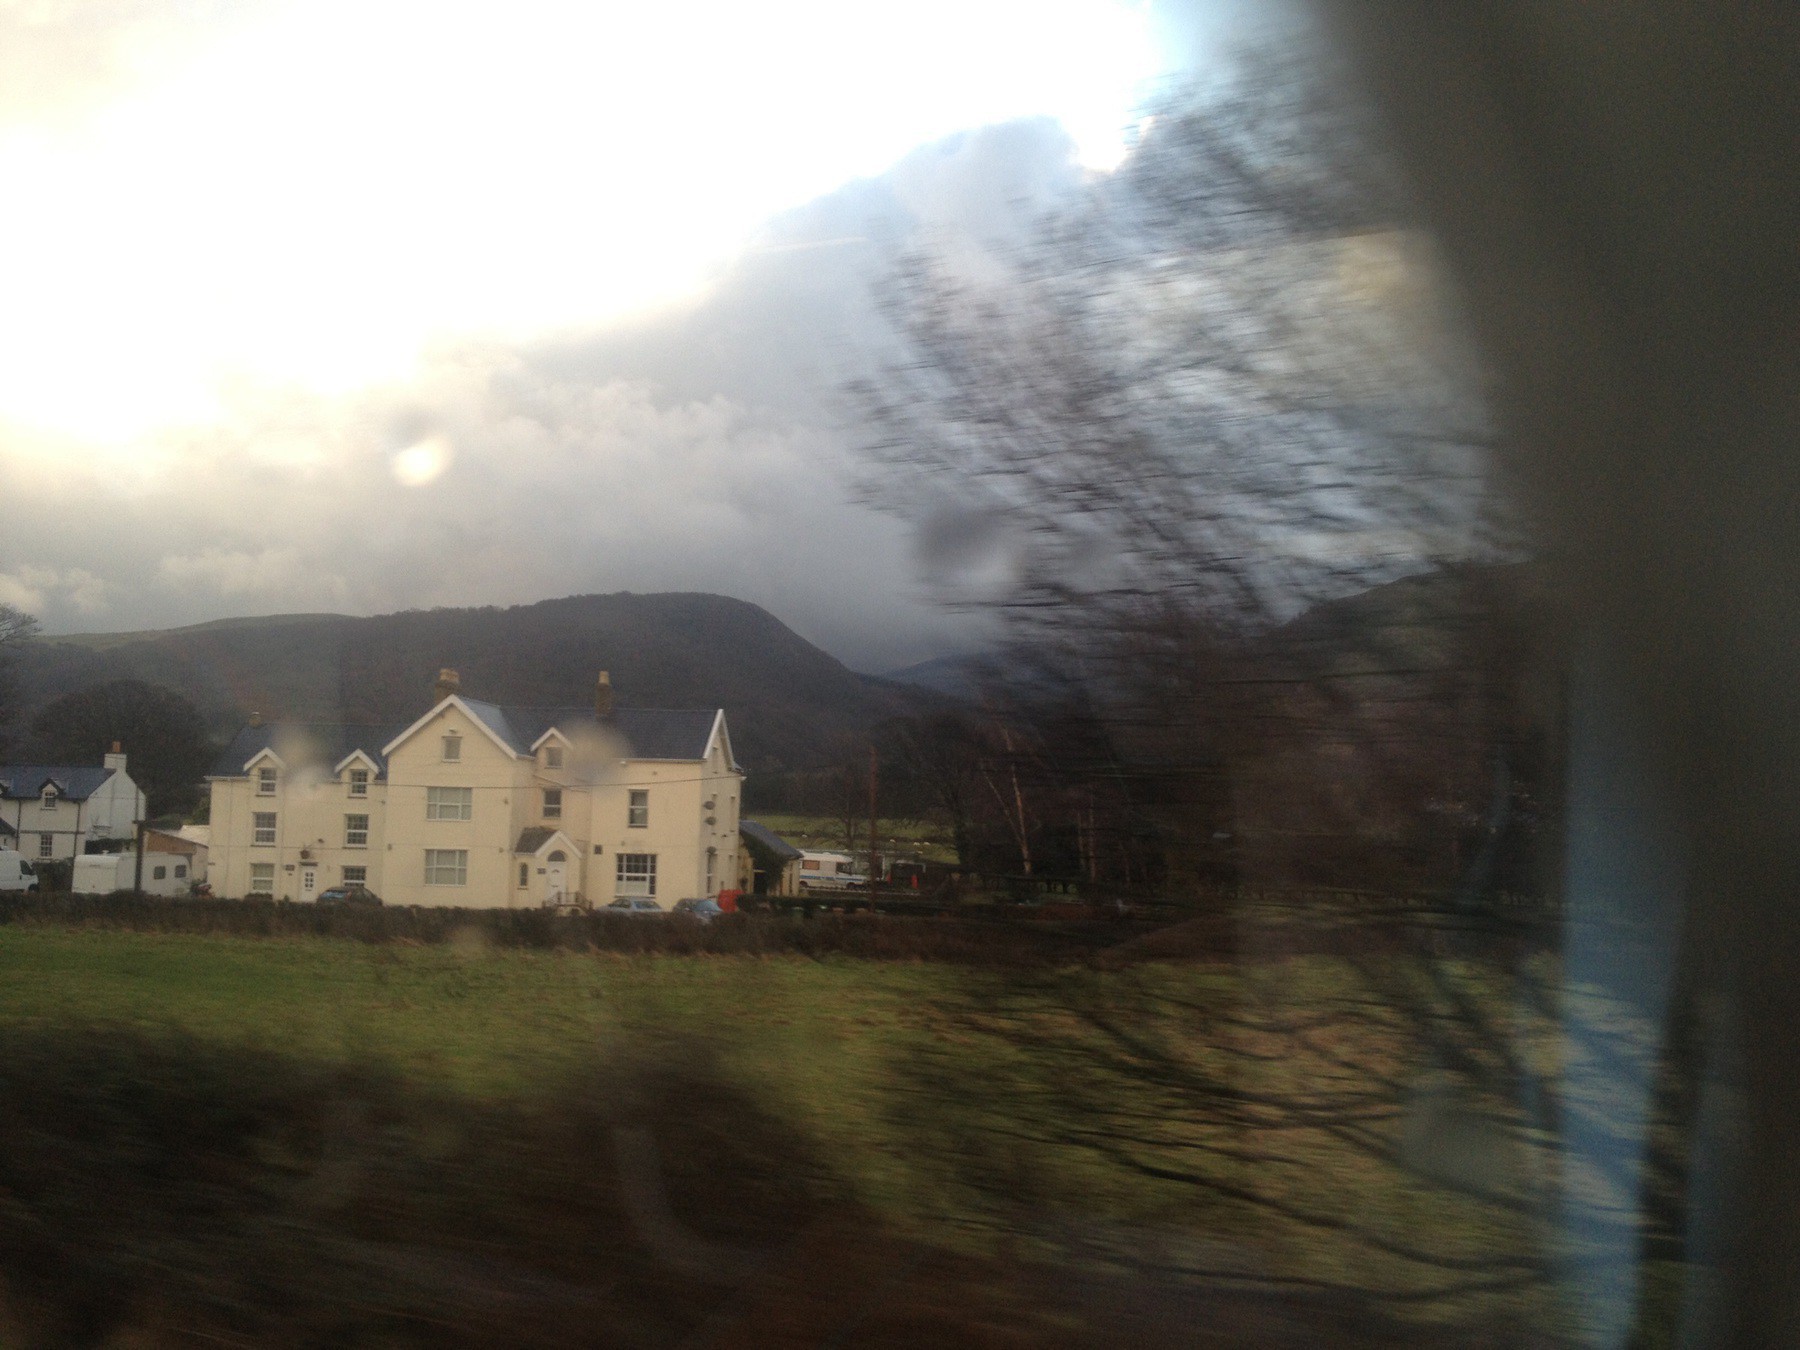 View of manor house, field, and hills through a train window.